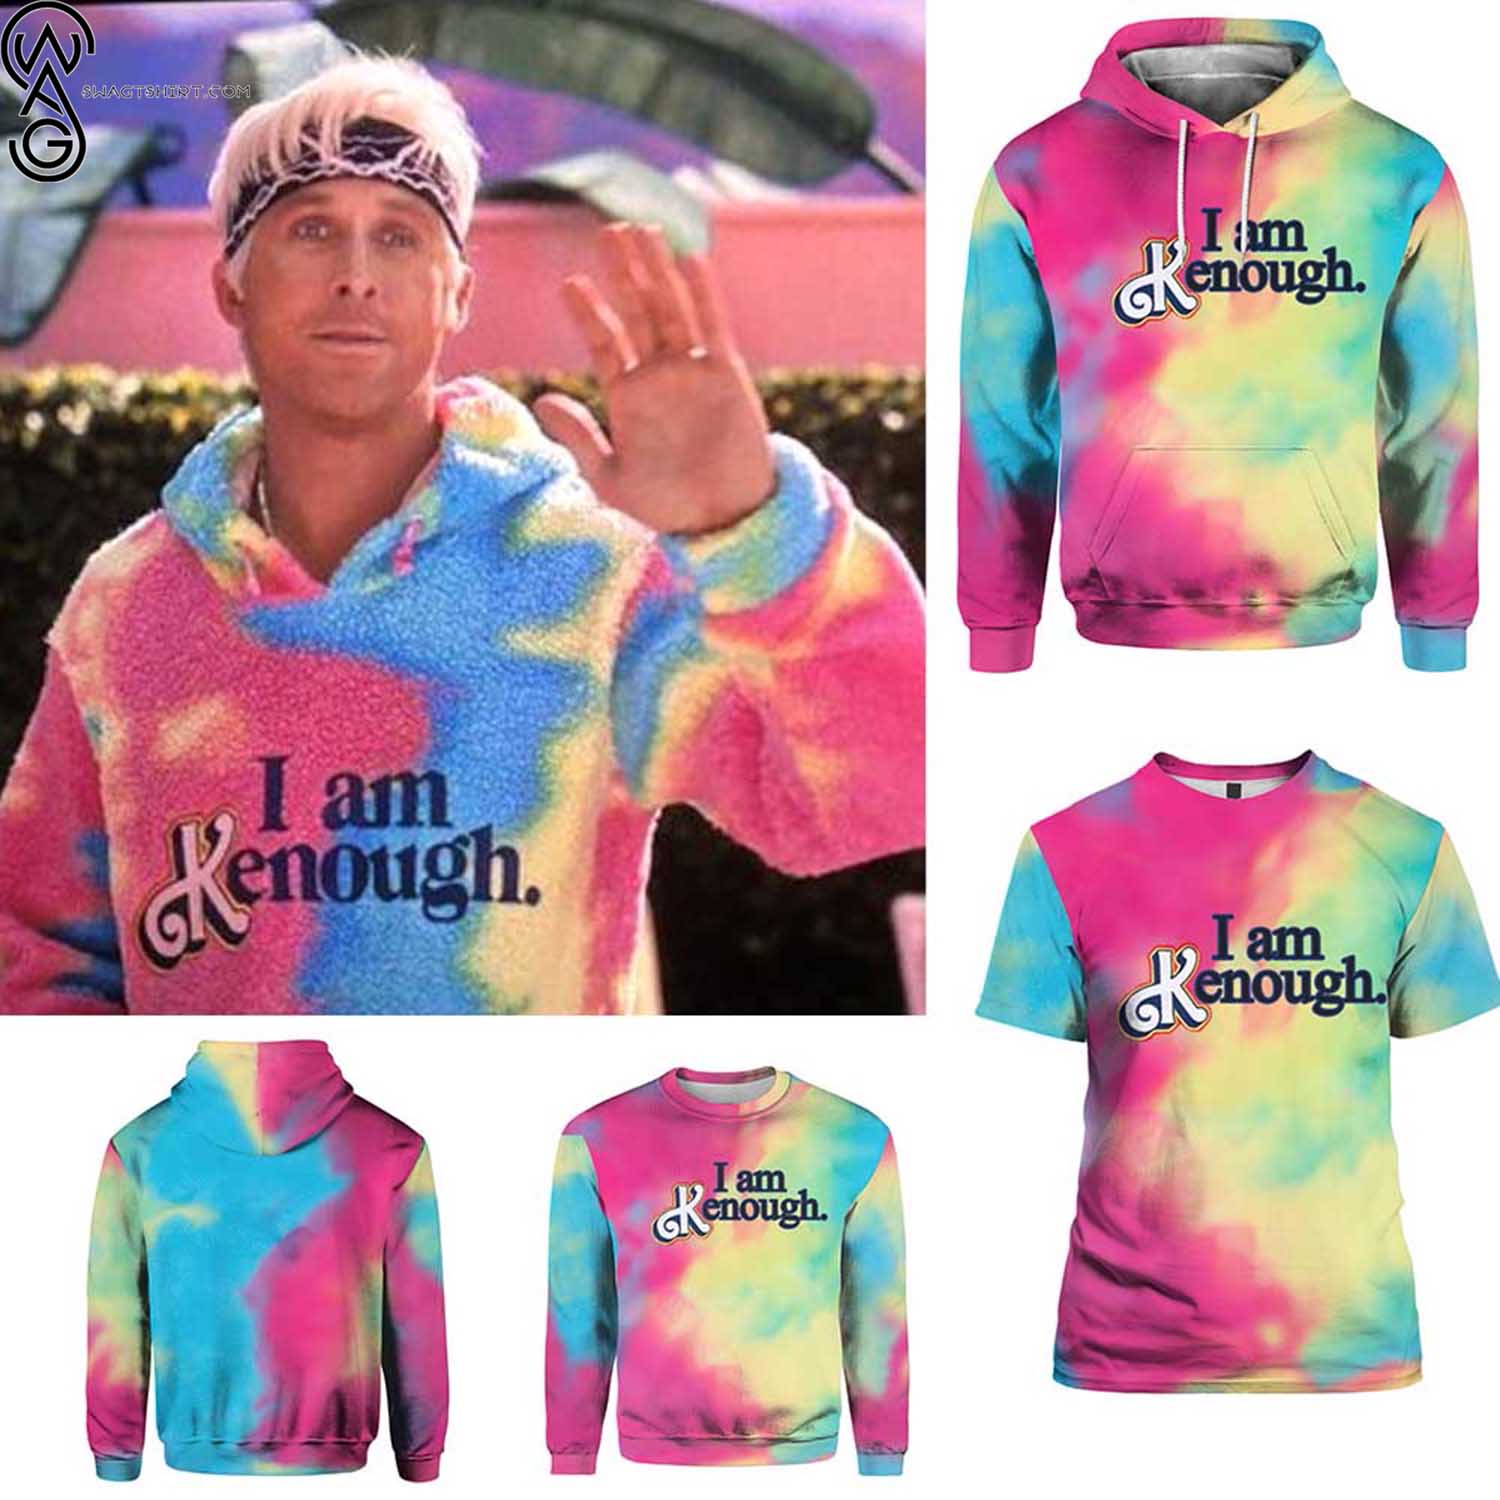 Barbie The Movie Ryan Gosling's 'I Am Kenough' Ken Hoodie Goes Viral After Premiere - An Unexpected Fashion Statement Sparks a New Wave of Empowerment